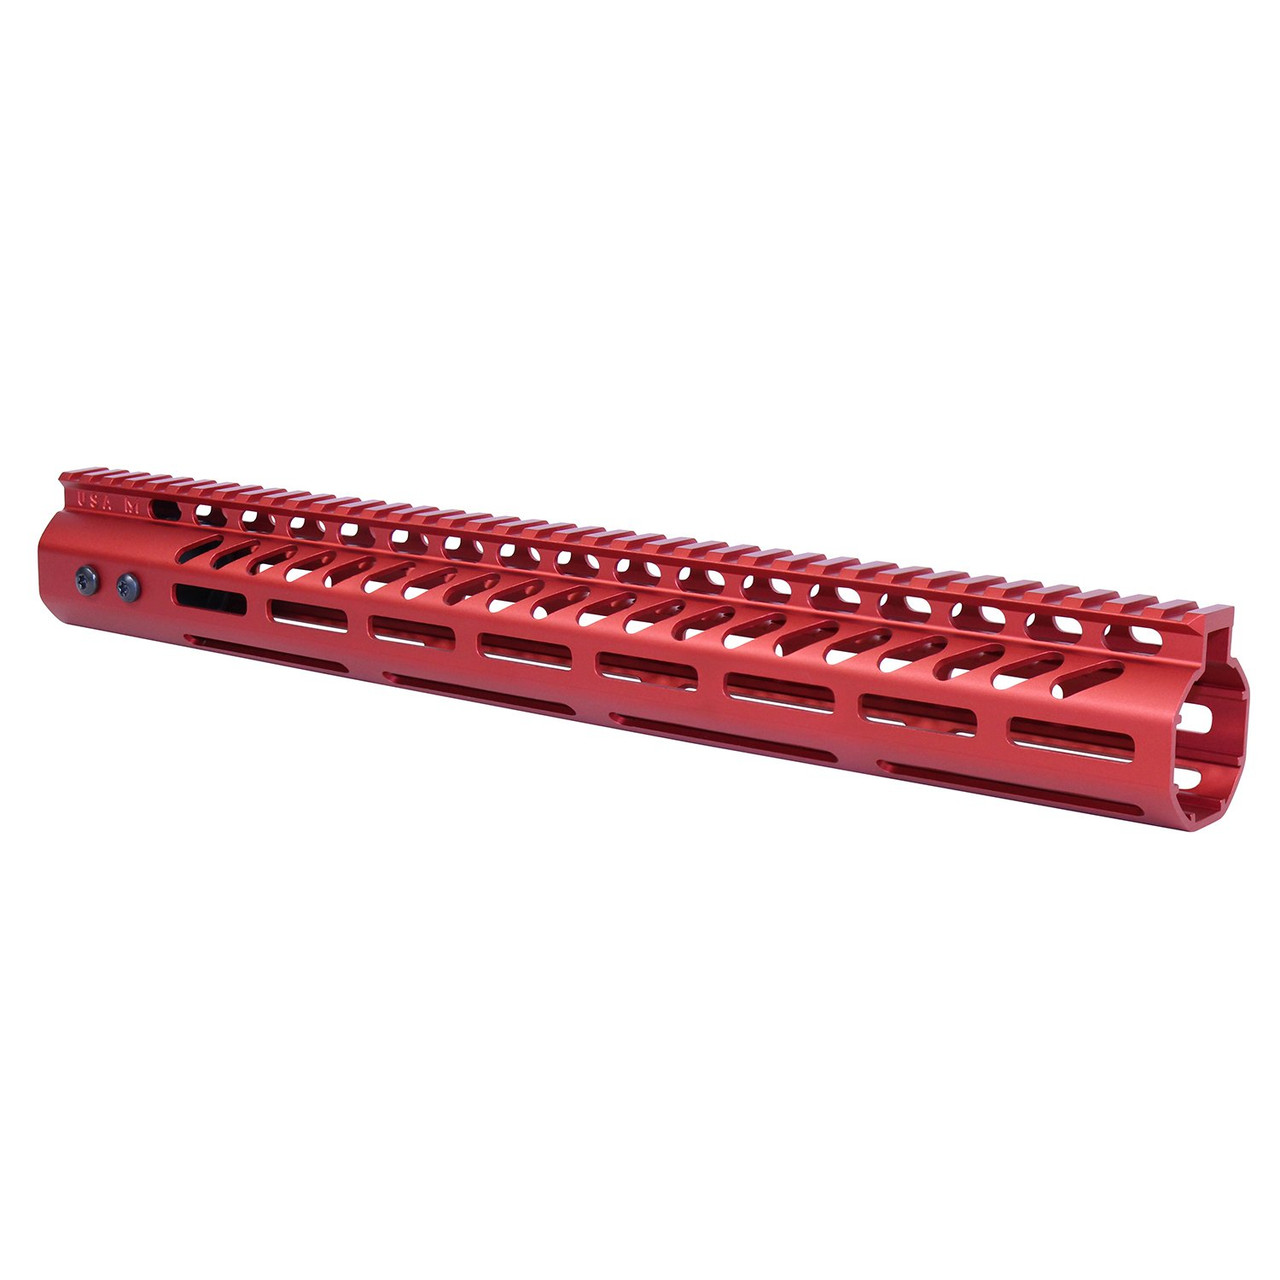 Guntec USA GT-15MLK-308-RED 15" Ultra Lightweight Thin M-LOK System Free Floating Handguard With Monolithic Top Rail (.308 Cal) (Anodized Red)